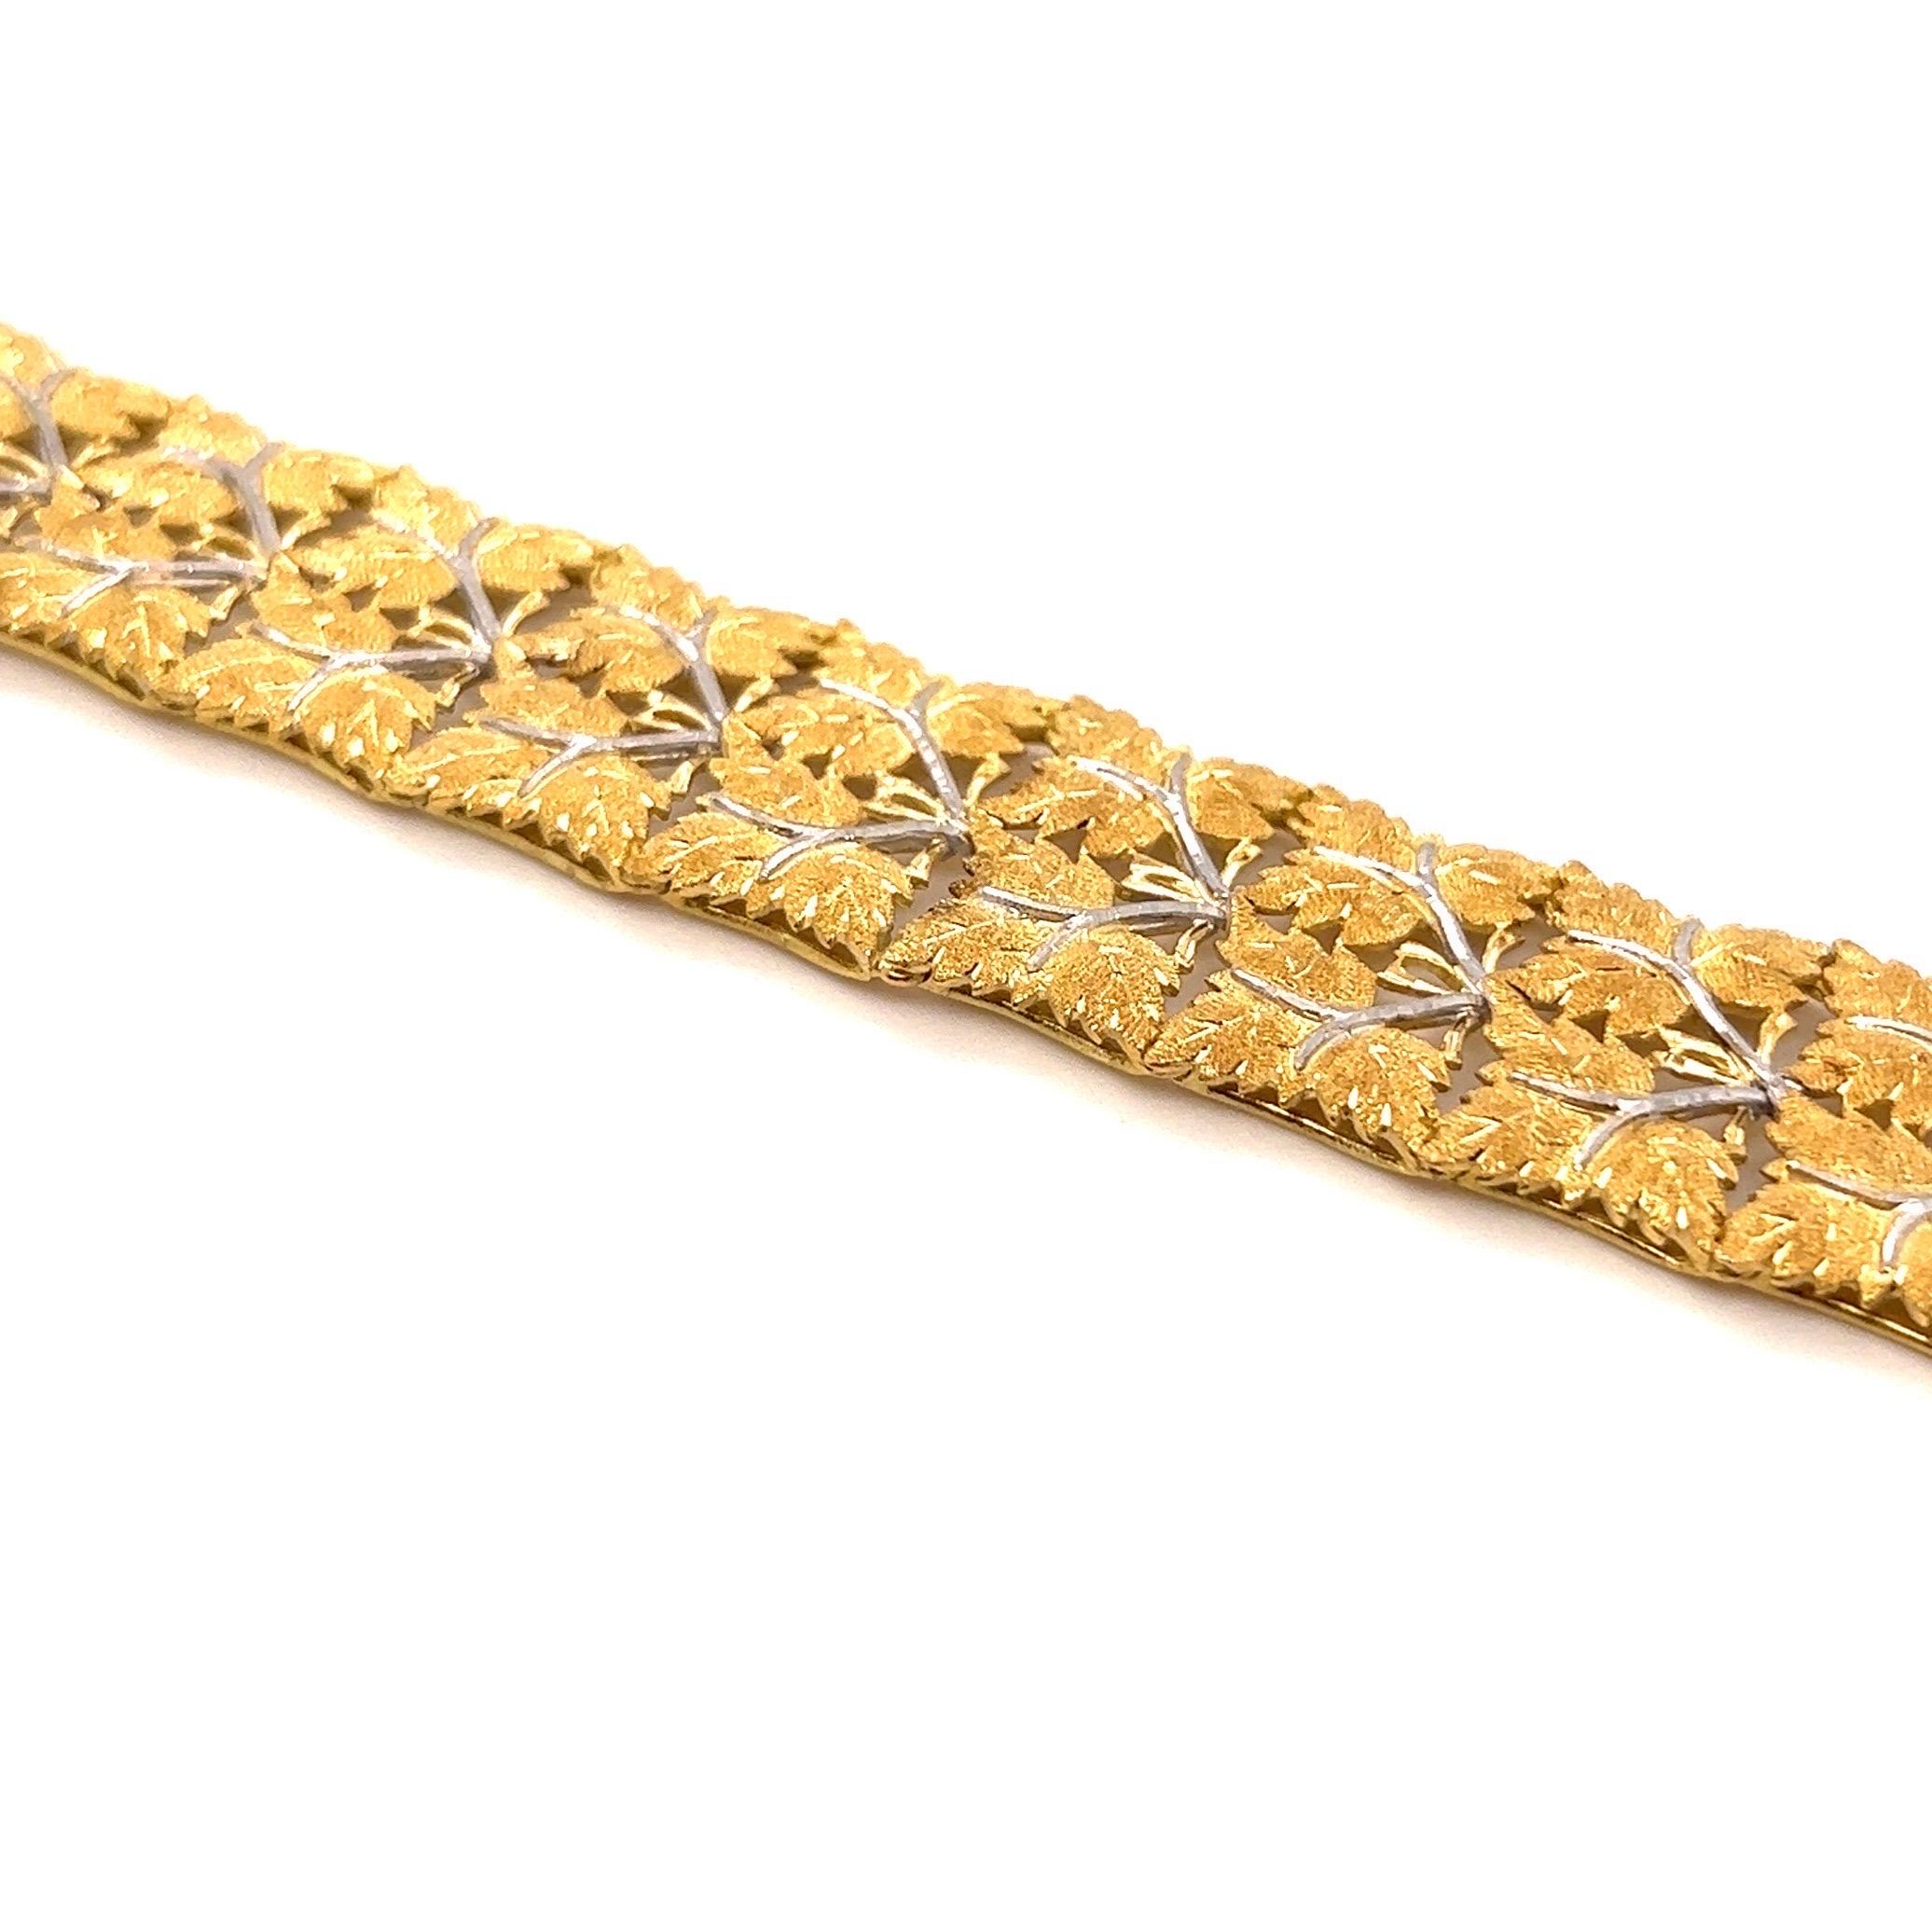 Delicate and elegant 18 karat yellow and white gold bracelet by Mario Buccellati, 1950s.

Masterfully handcrafted in 18 karat gold, this filigree link bracelet is composed of finely textured, matt-finished yellow gold grape leaves with the midribs